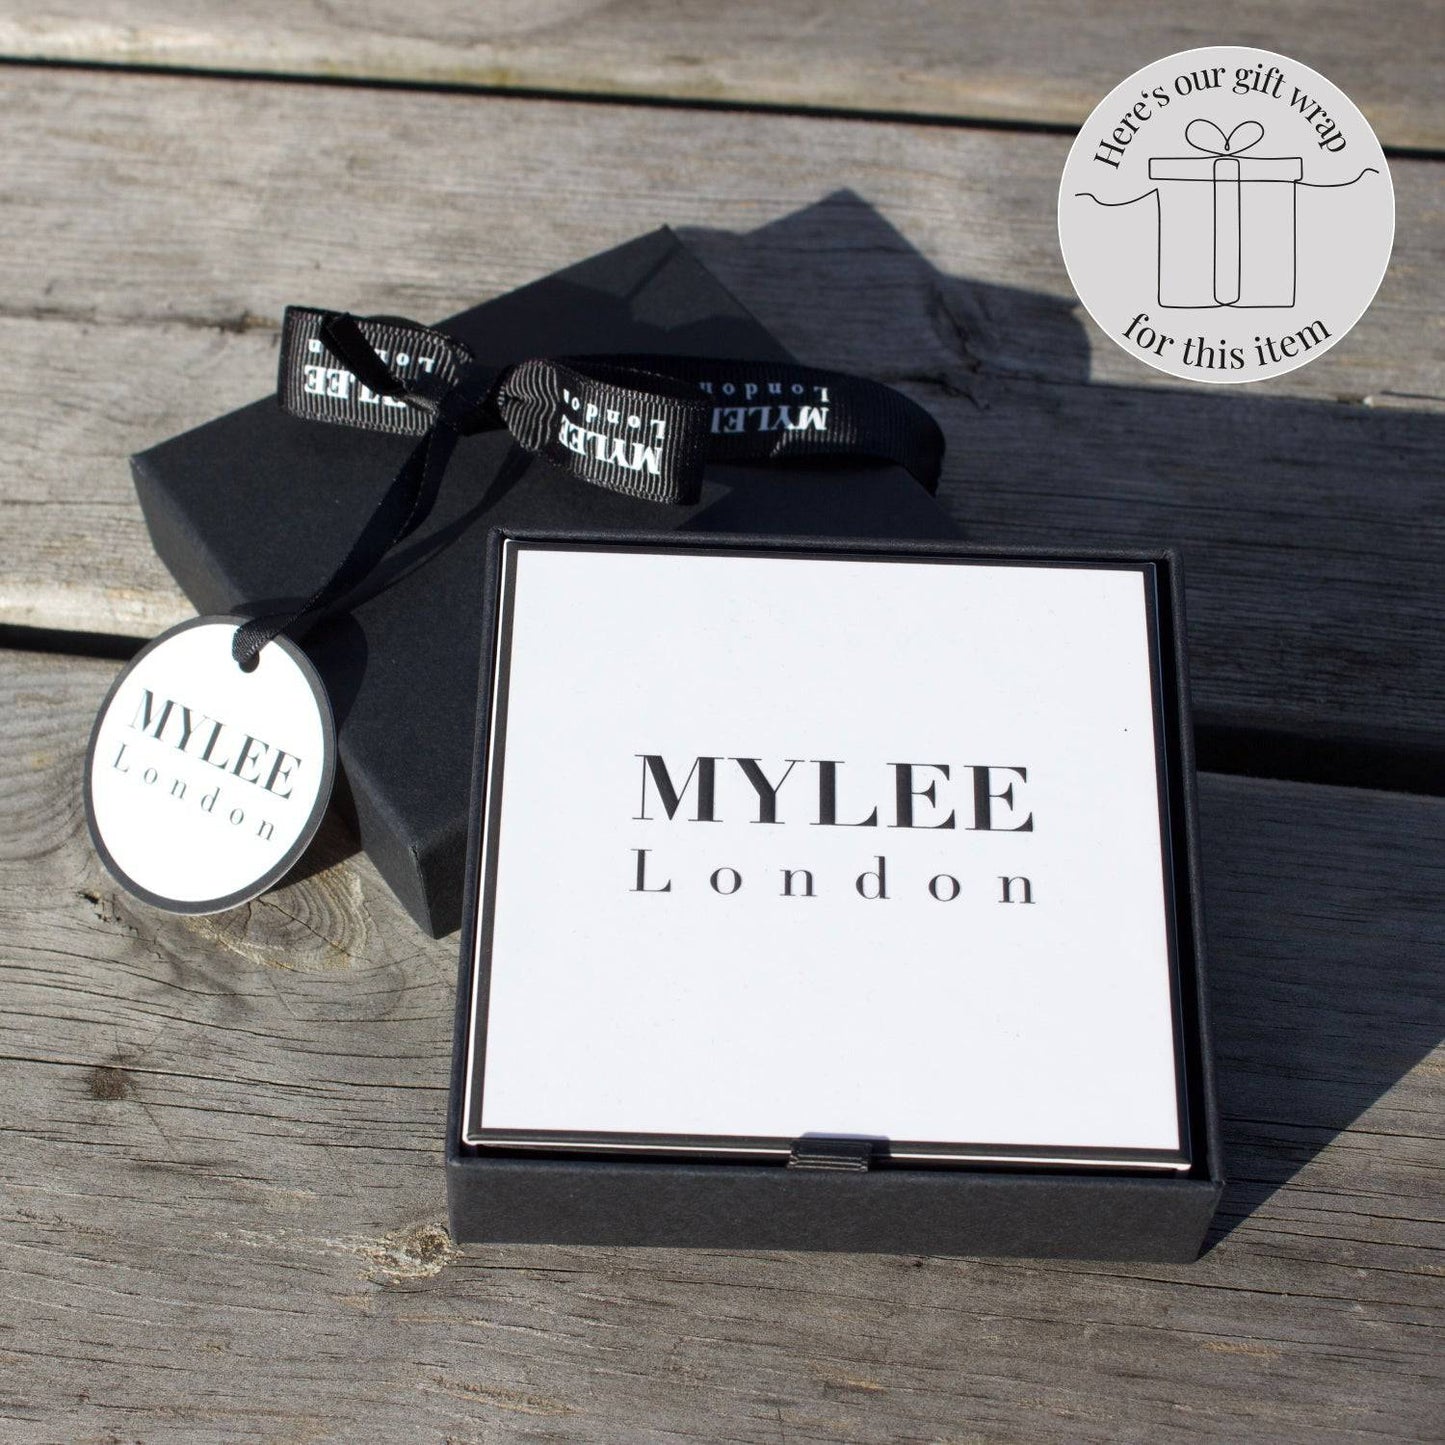 Guinea Pig Silver Necklace - Personalised - MYLEE London